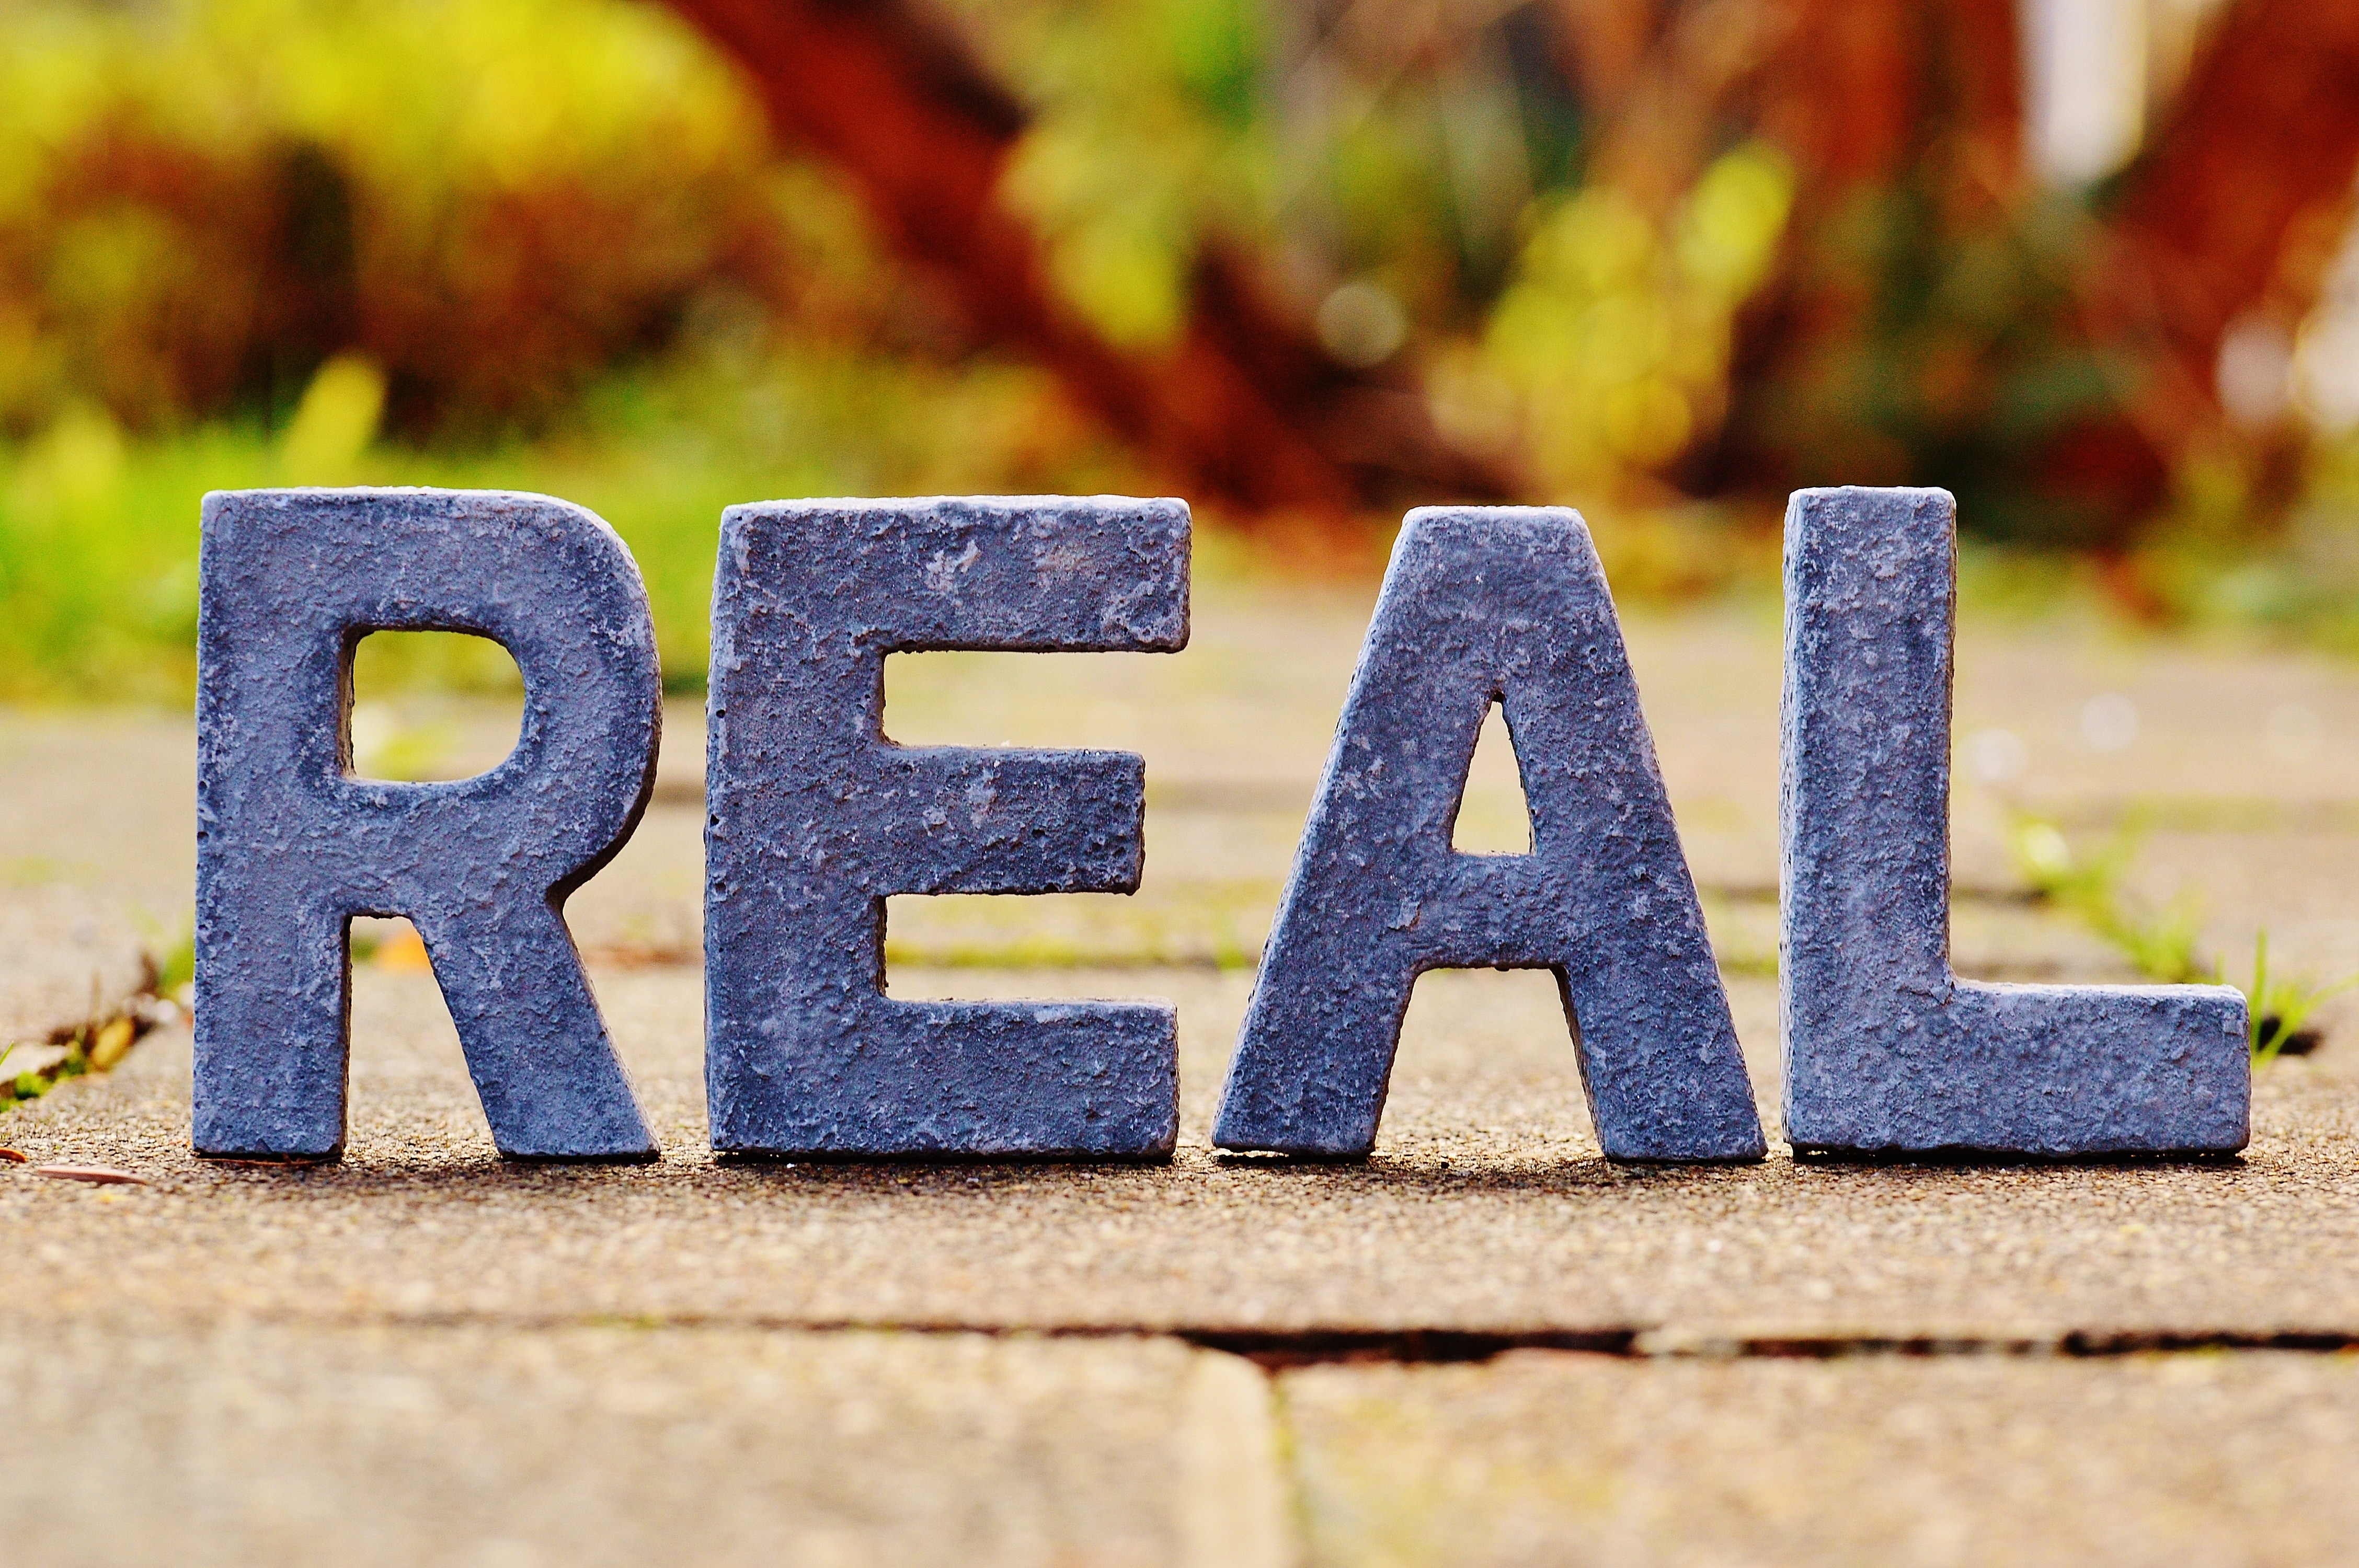 Real, Lettering, Reality, Really, True, education, learning